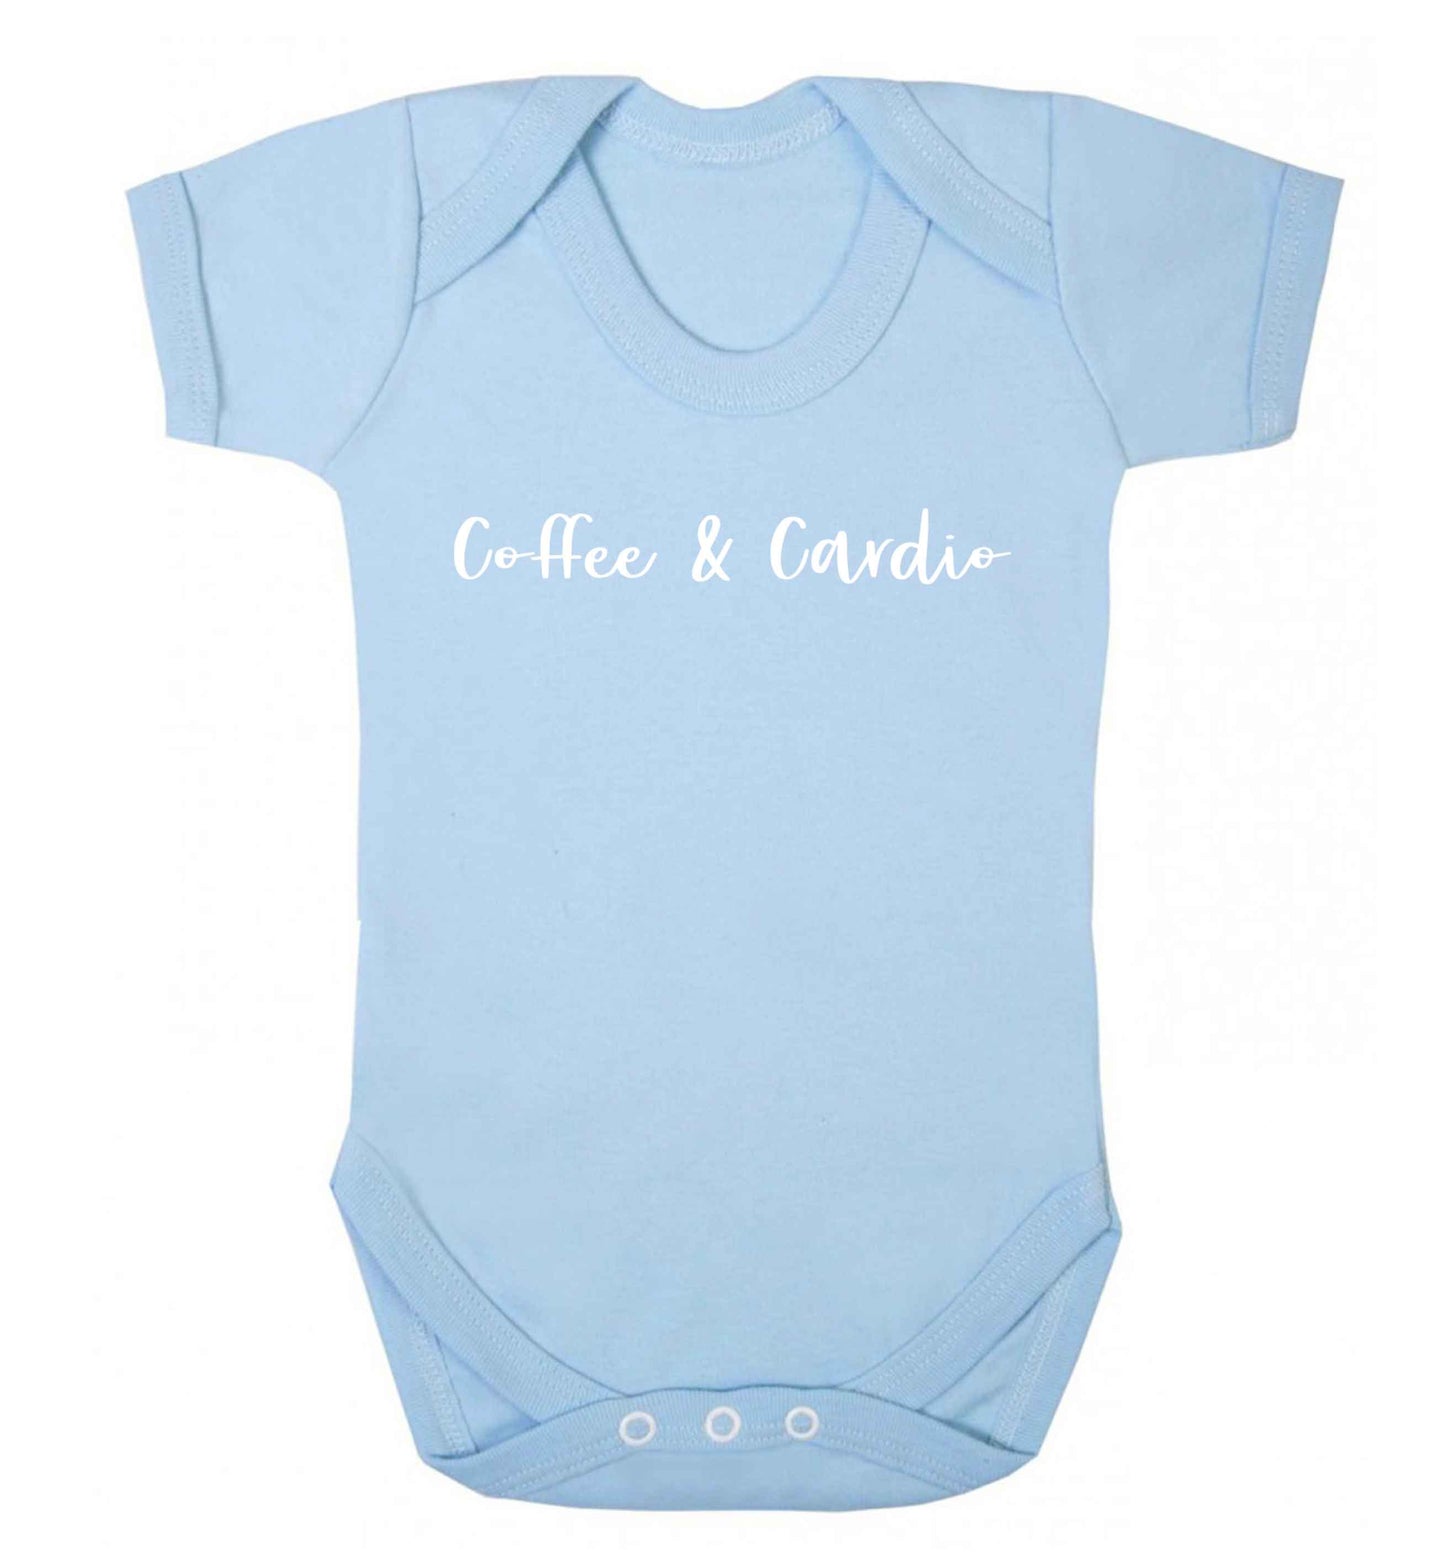 Coffee and cardio Baby Vest pale blue 18-24 months